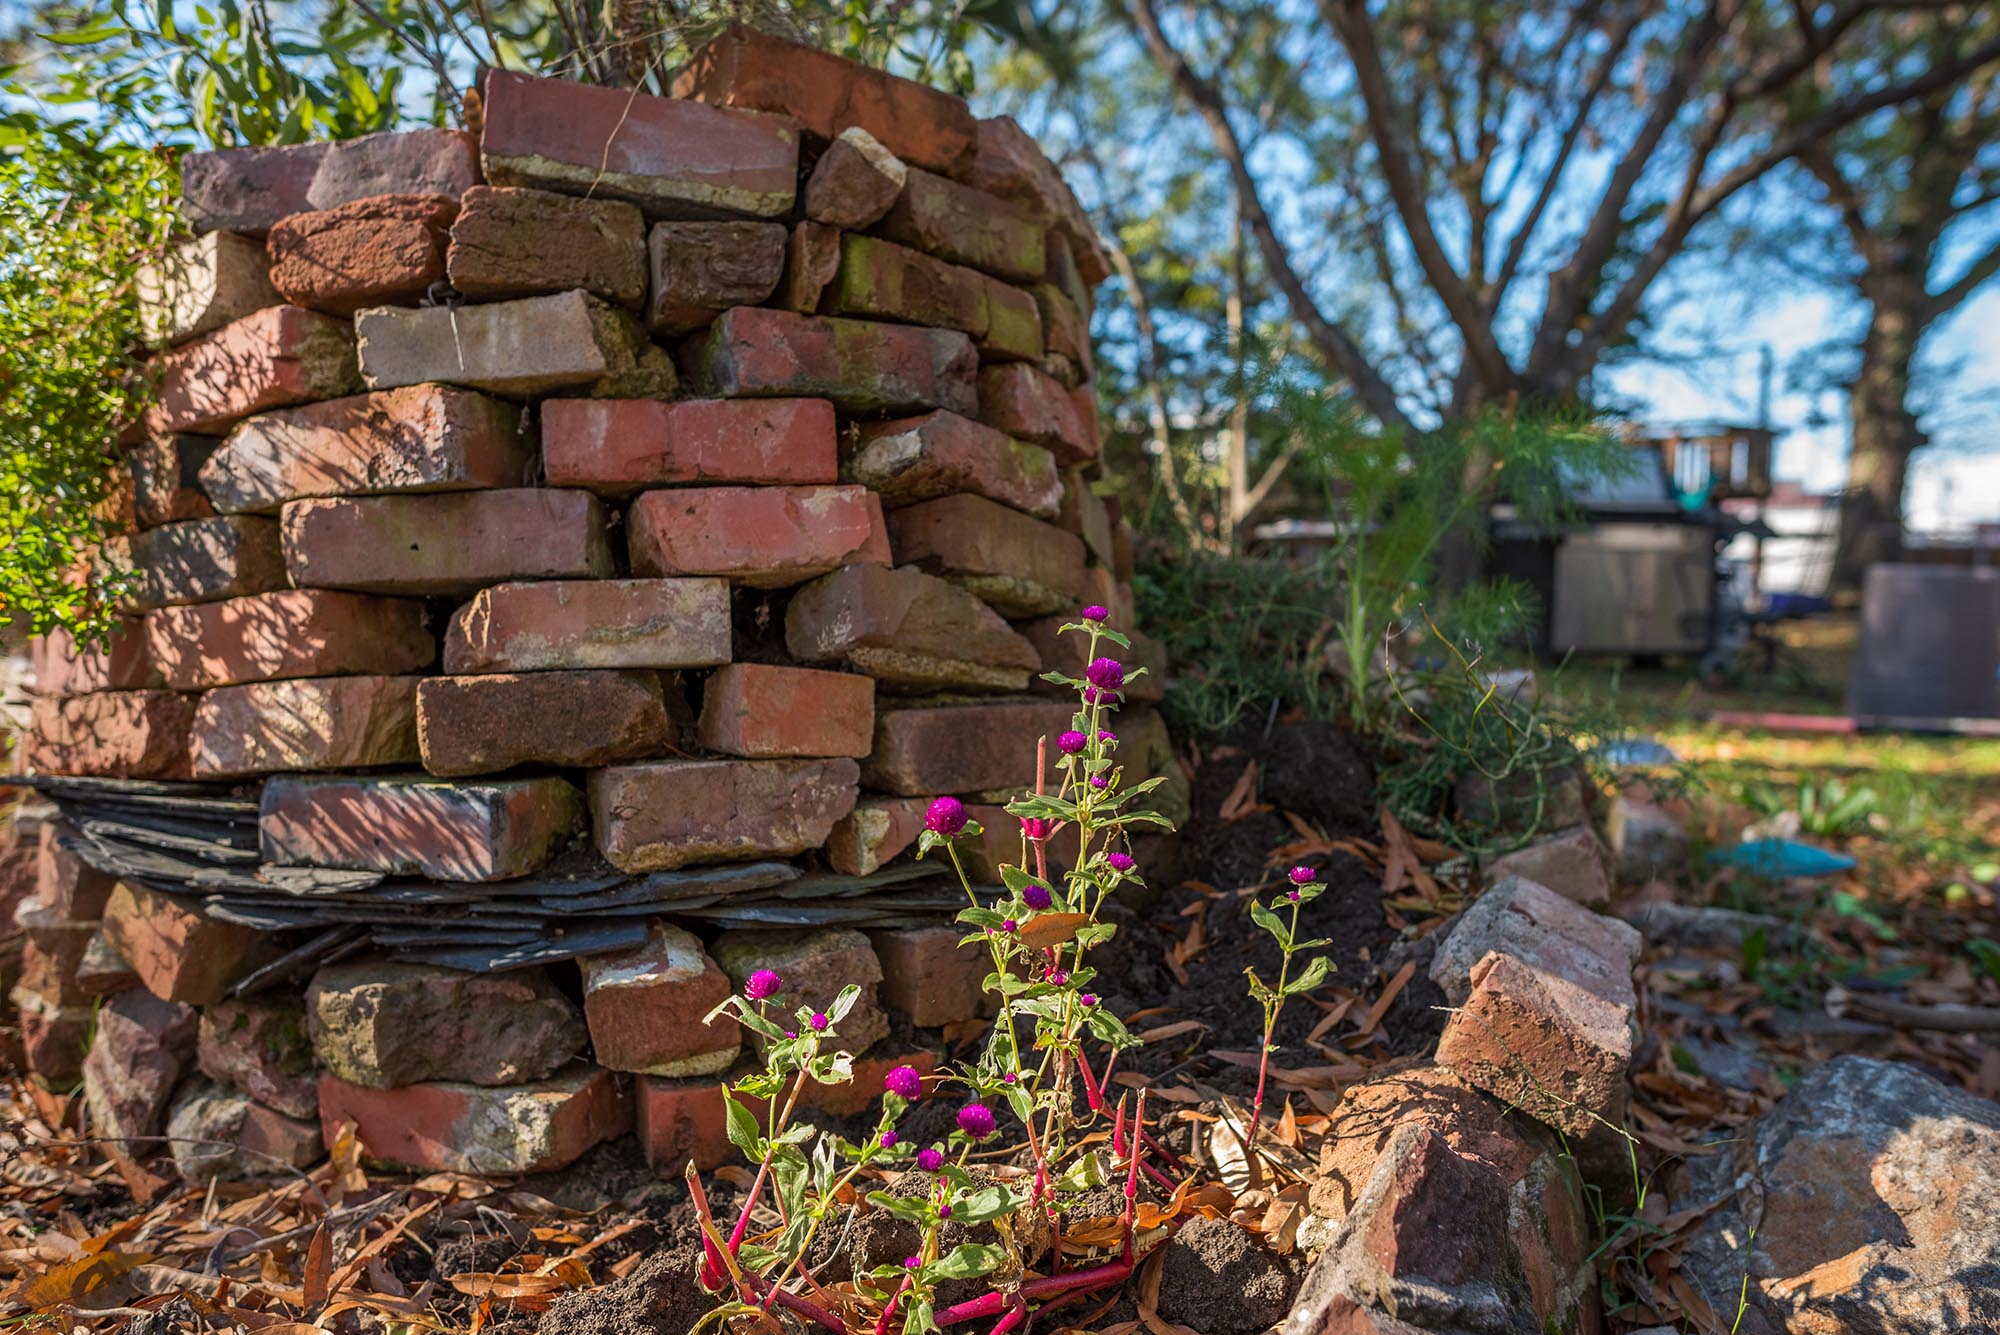 View from the ground of bricks stacked in an herb spiral, with purple flowers in the foreground